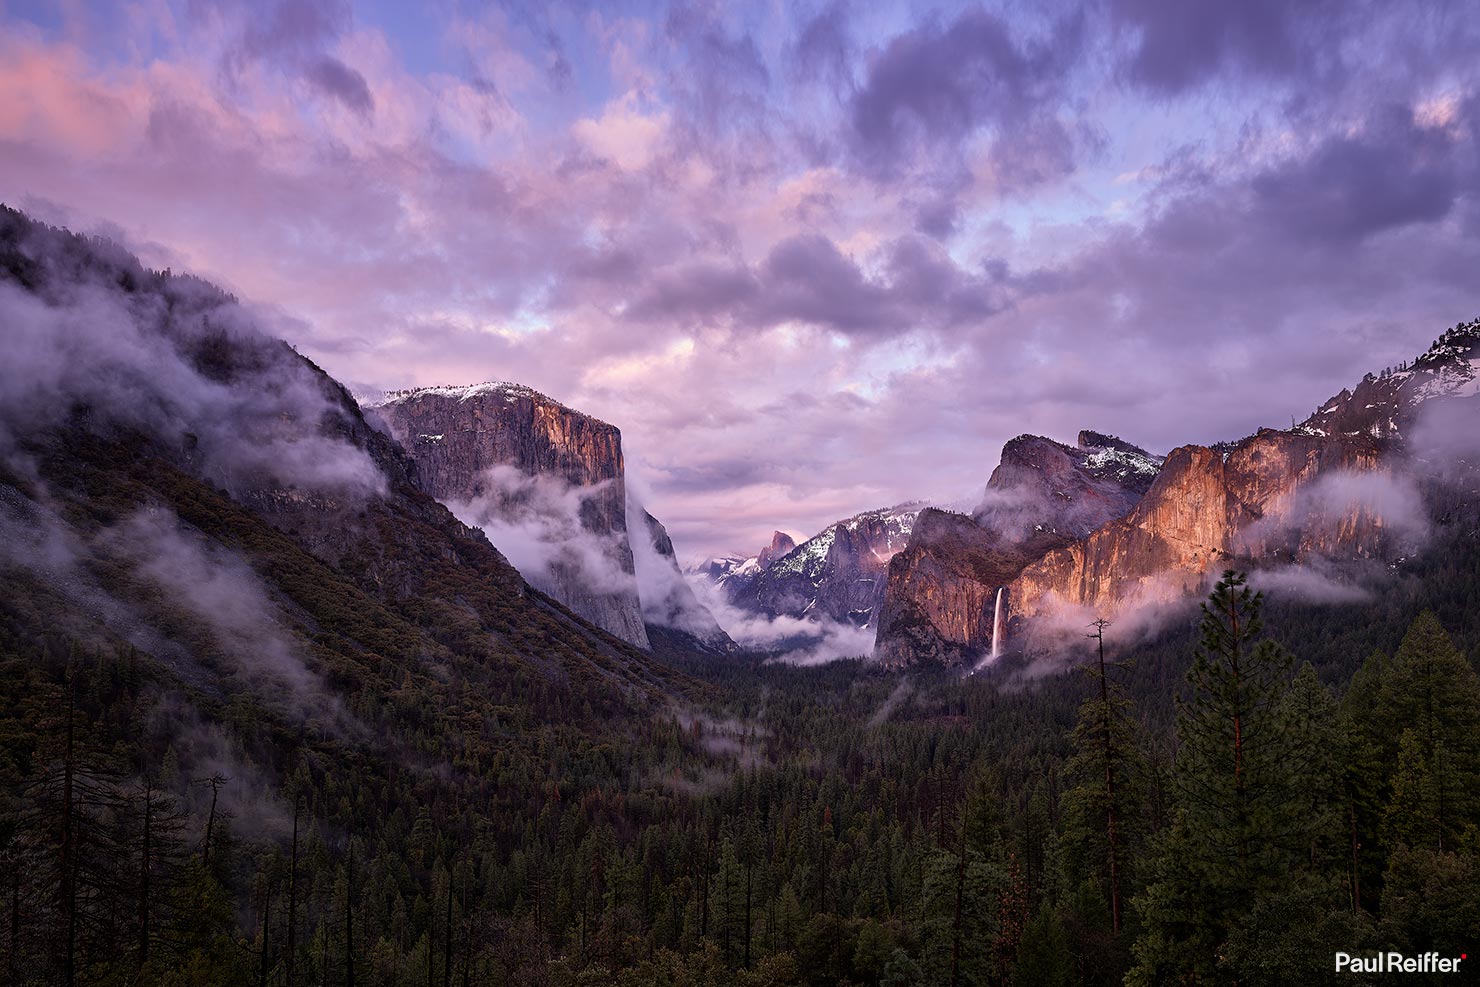 Yosemite Valley Tunnel View Sunset Clouds Sky Bridal Veil Falls El Capitan Lit Up Paul Reiffer Medium Format Phase One IQ4 Spring 2019